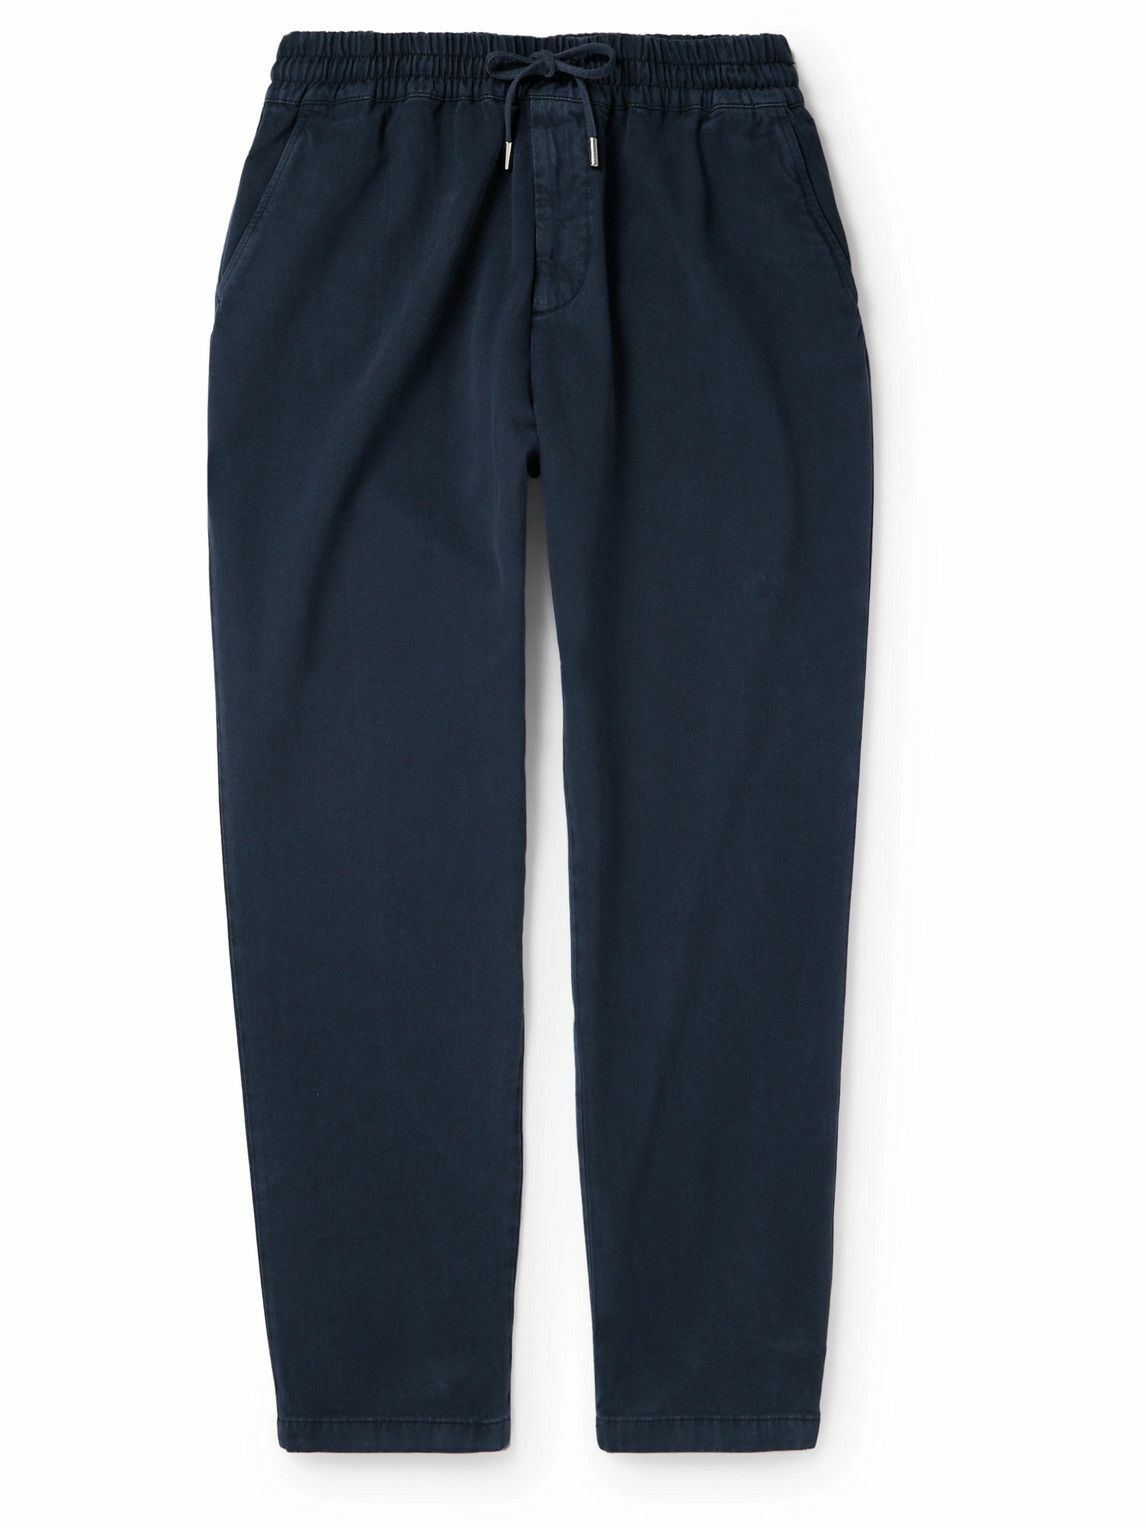 MR P. Cotton and Linen-Blend Twill Drawstring Trousers for Men